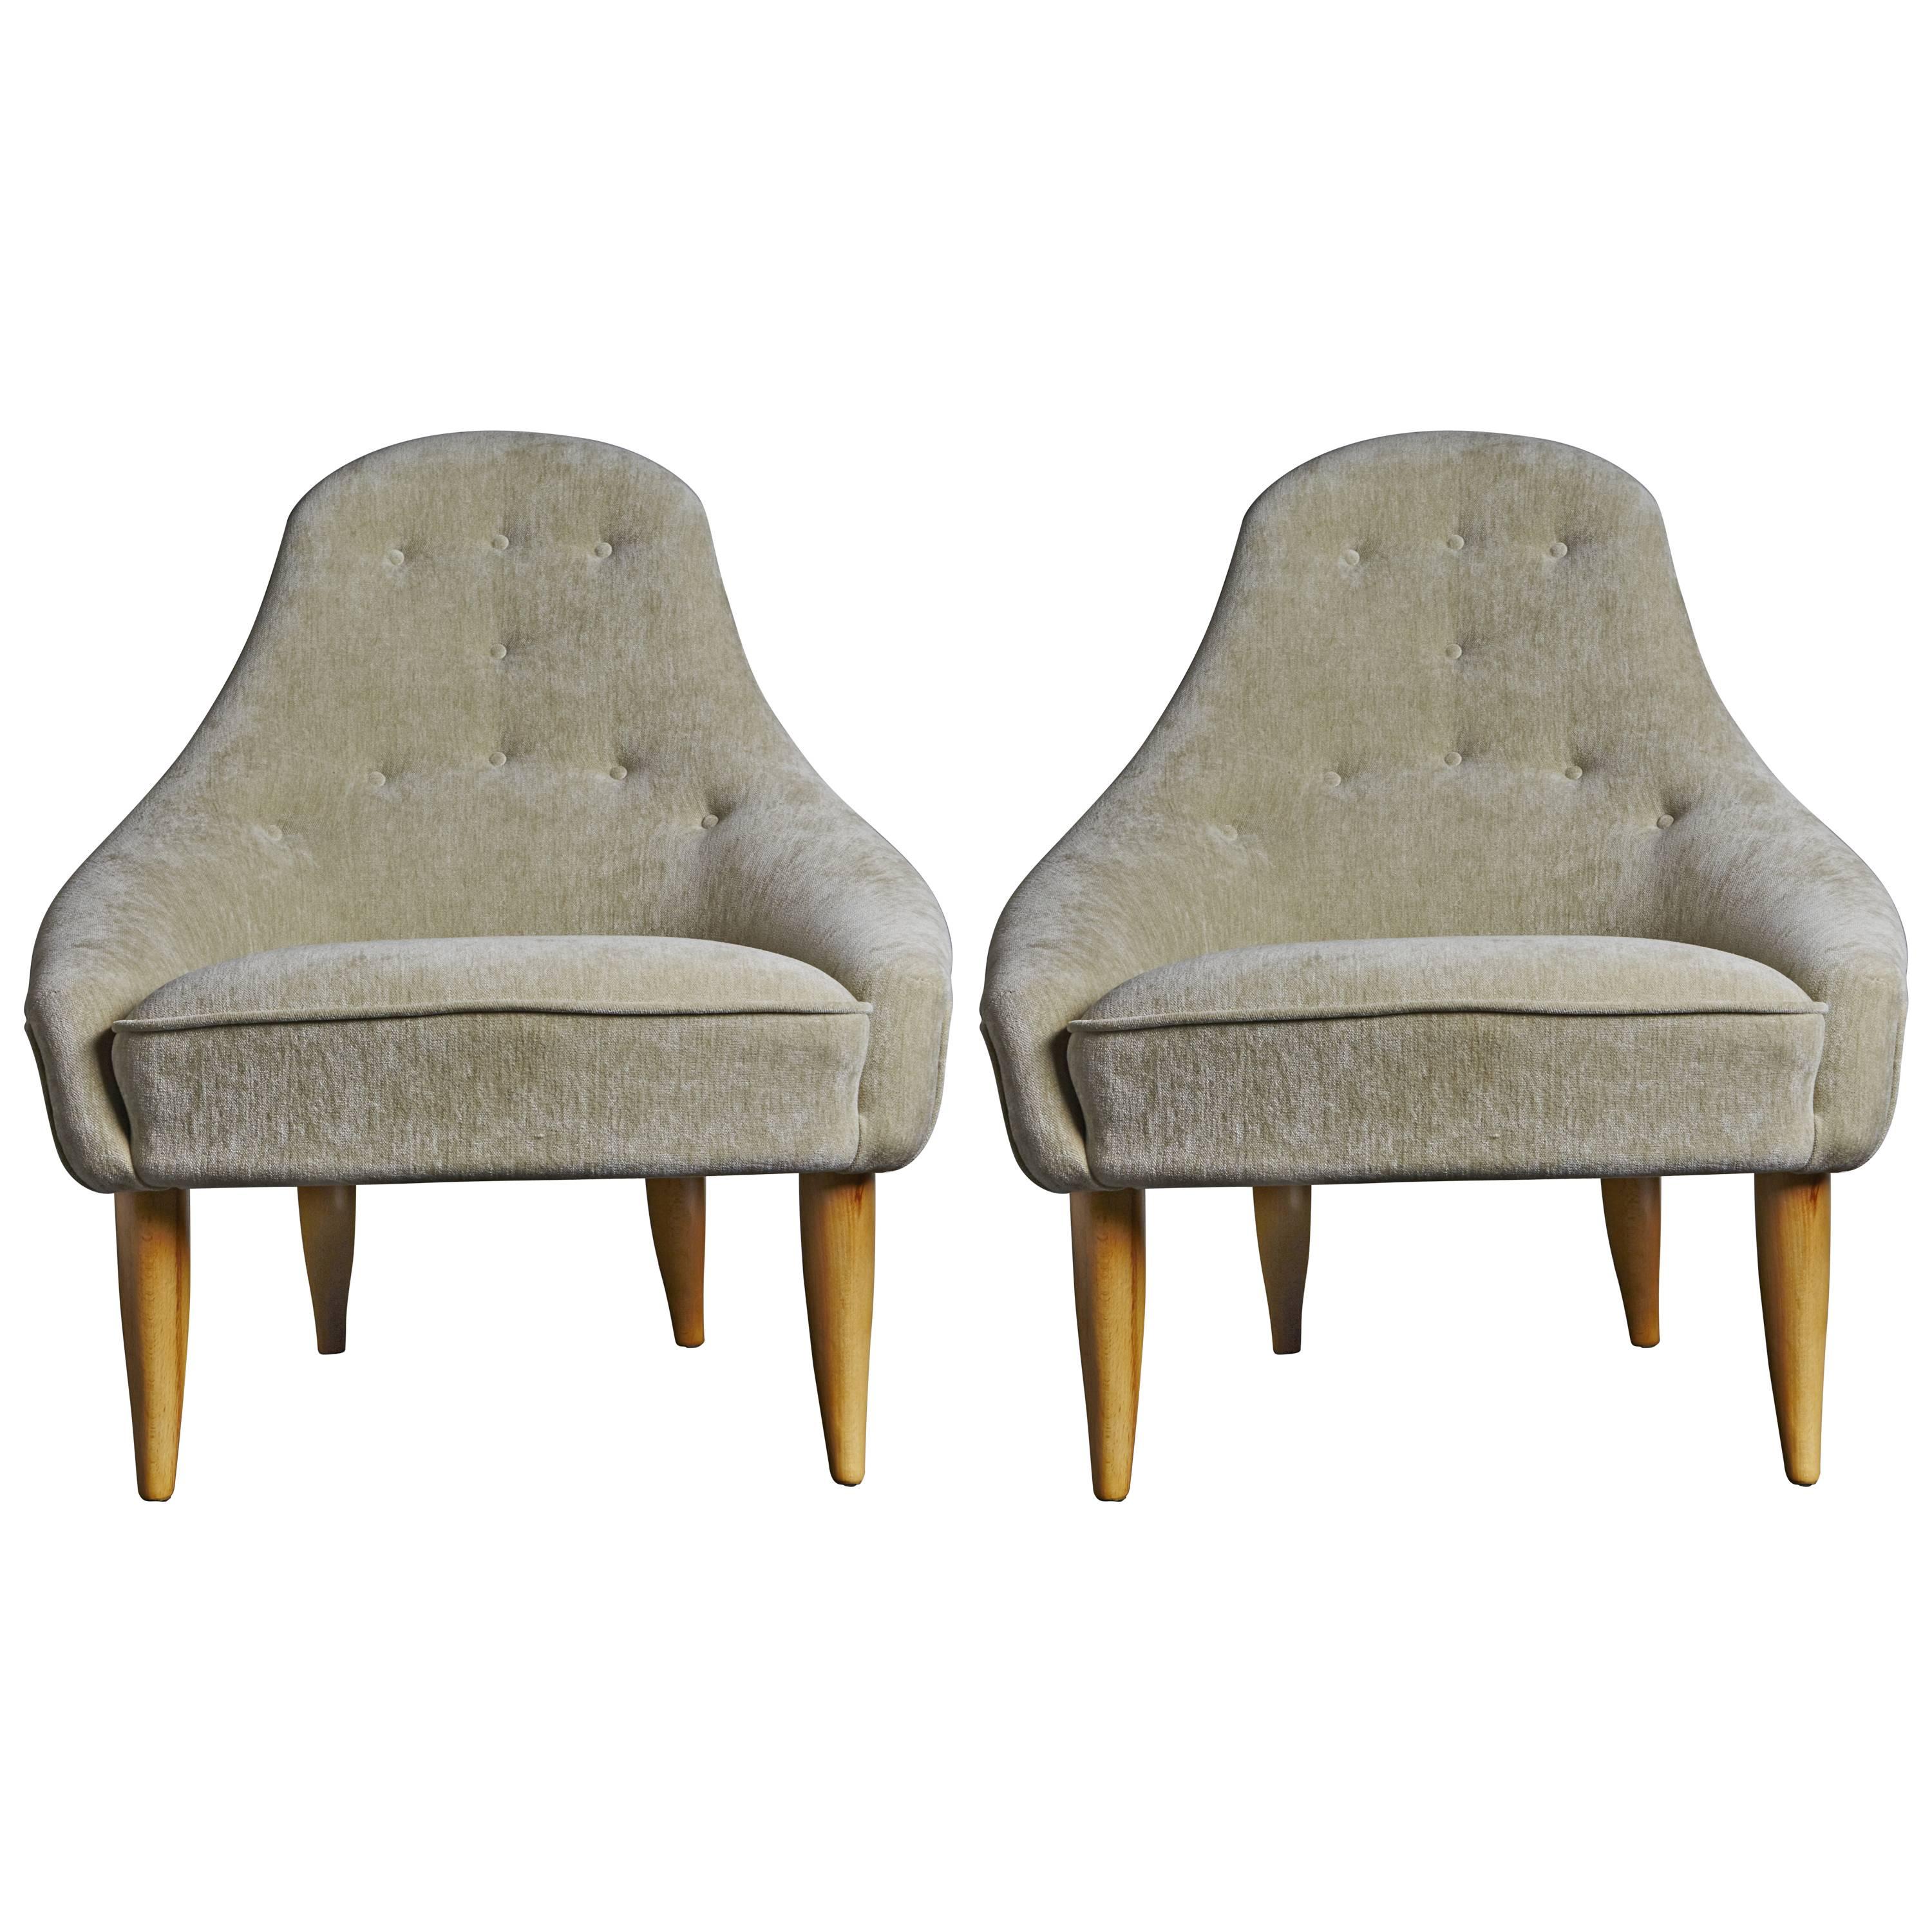 Pair of Armchairs by Kerstin Hörlin Holmquist, circa 1956 For Sale